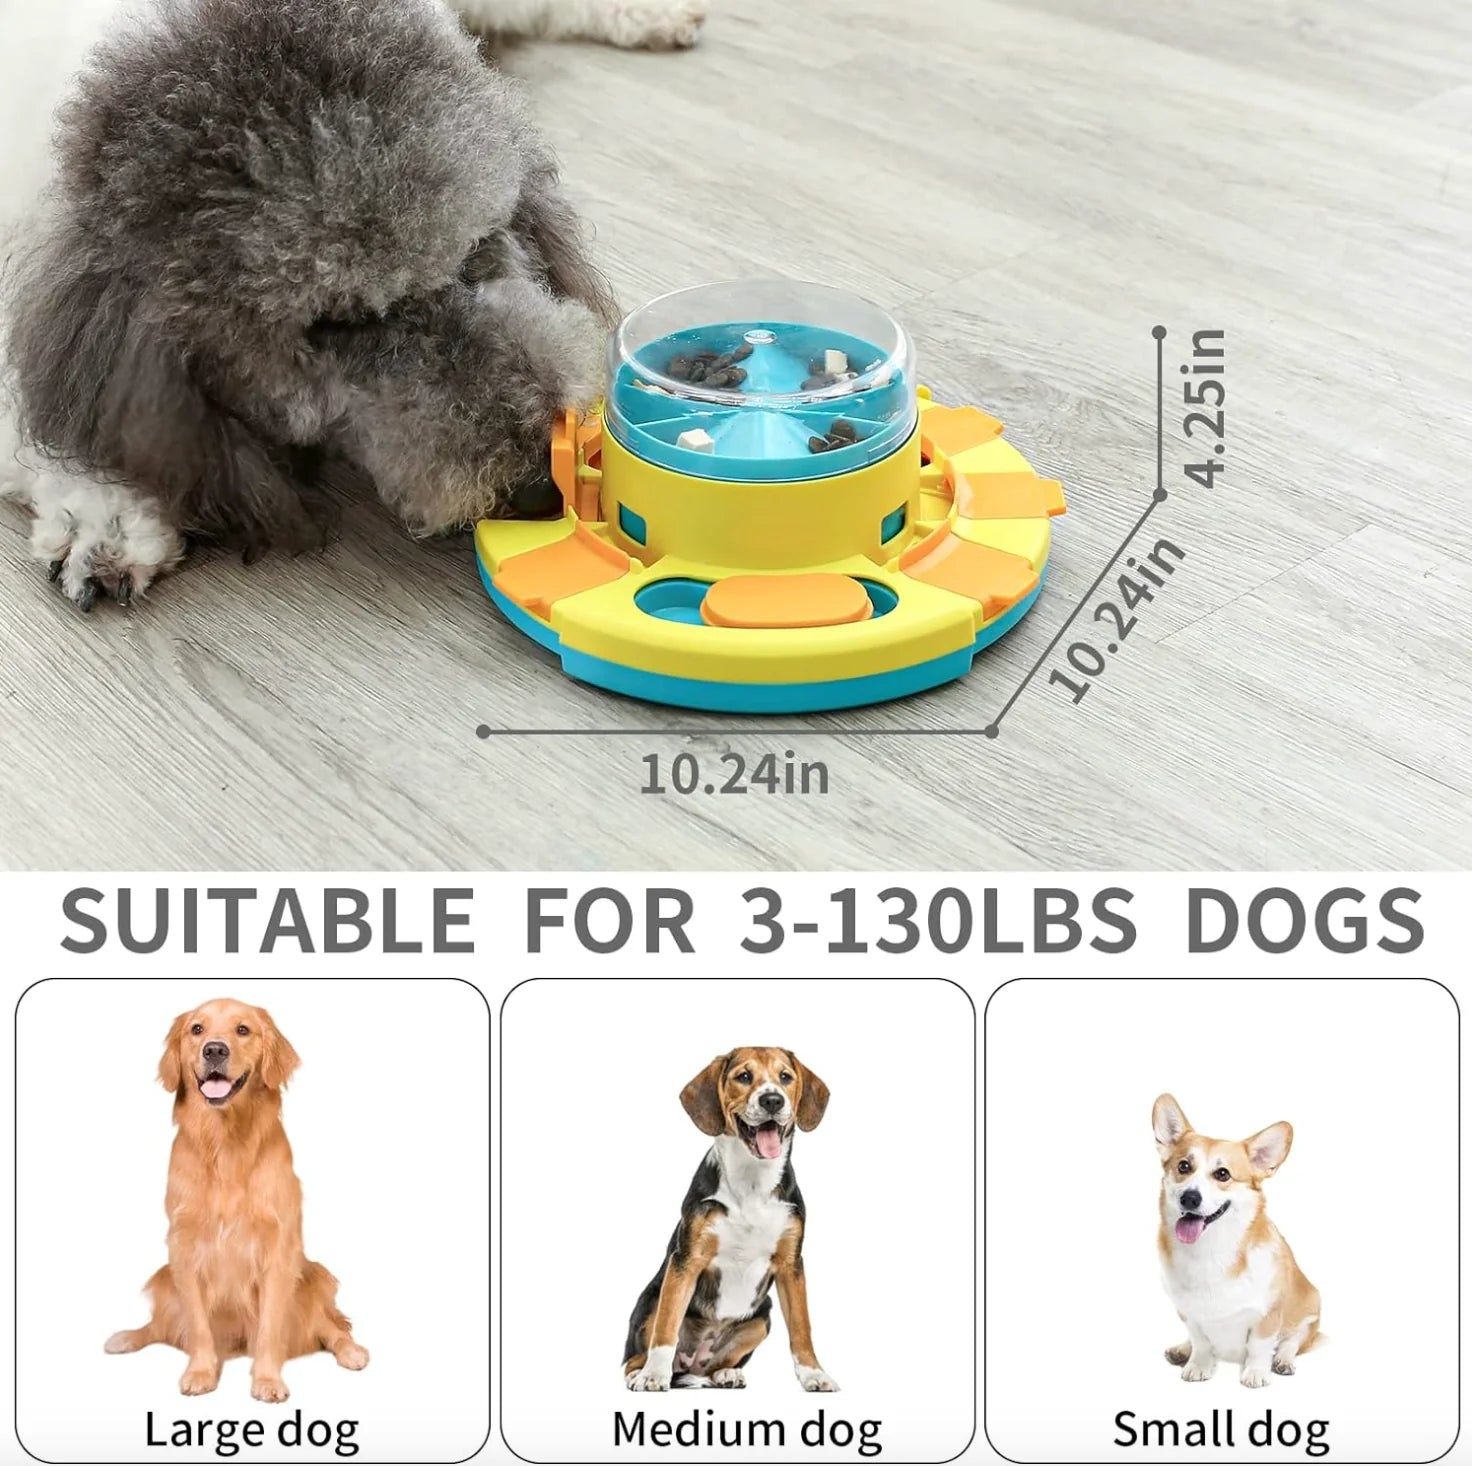 HappyPaws Puzzle Feeder - Fun for hours!